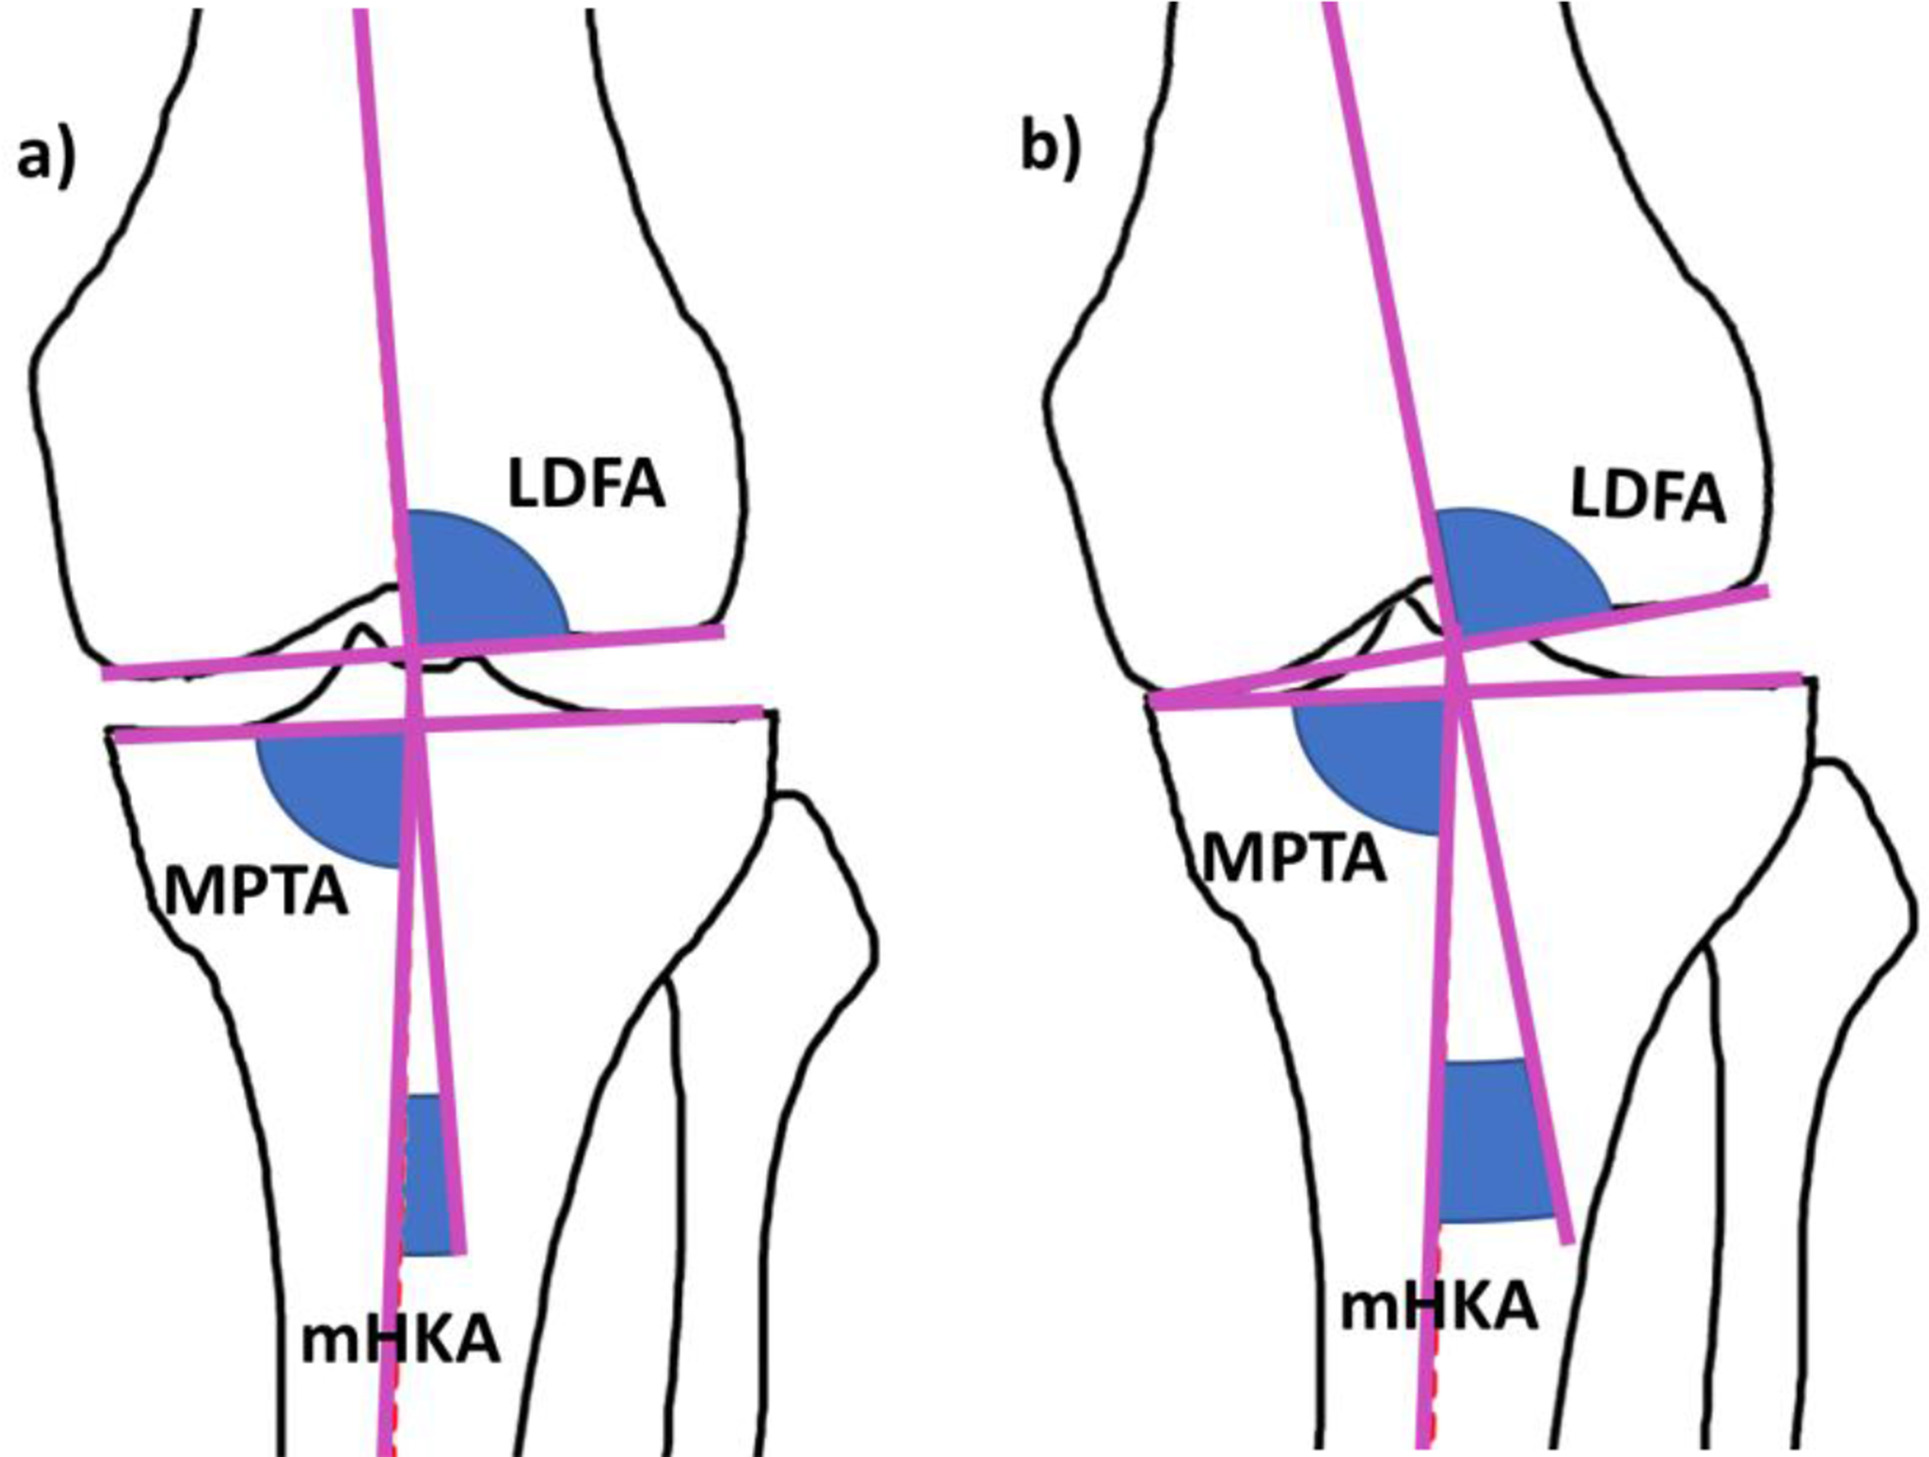 Fig. 1 
            Changes in coronal alignment and mechanical hip-knee-ankle angle (mHKA) in degenerative arthritis. a) Lateral distal femoral angle (LDFA), medial proximal tibial angle (MPTA) and mHKA in a knee with preserved joint space and mild constitutional varus alignment. b) The same knee following degenerative loss of medial joint space, showing a change in mHKA and no change to LDFA and MPTA.
          